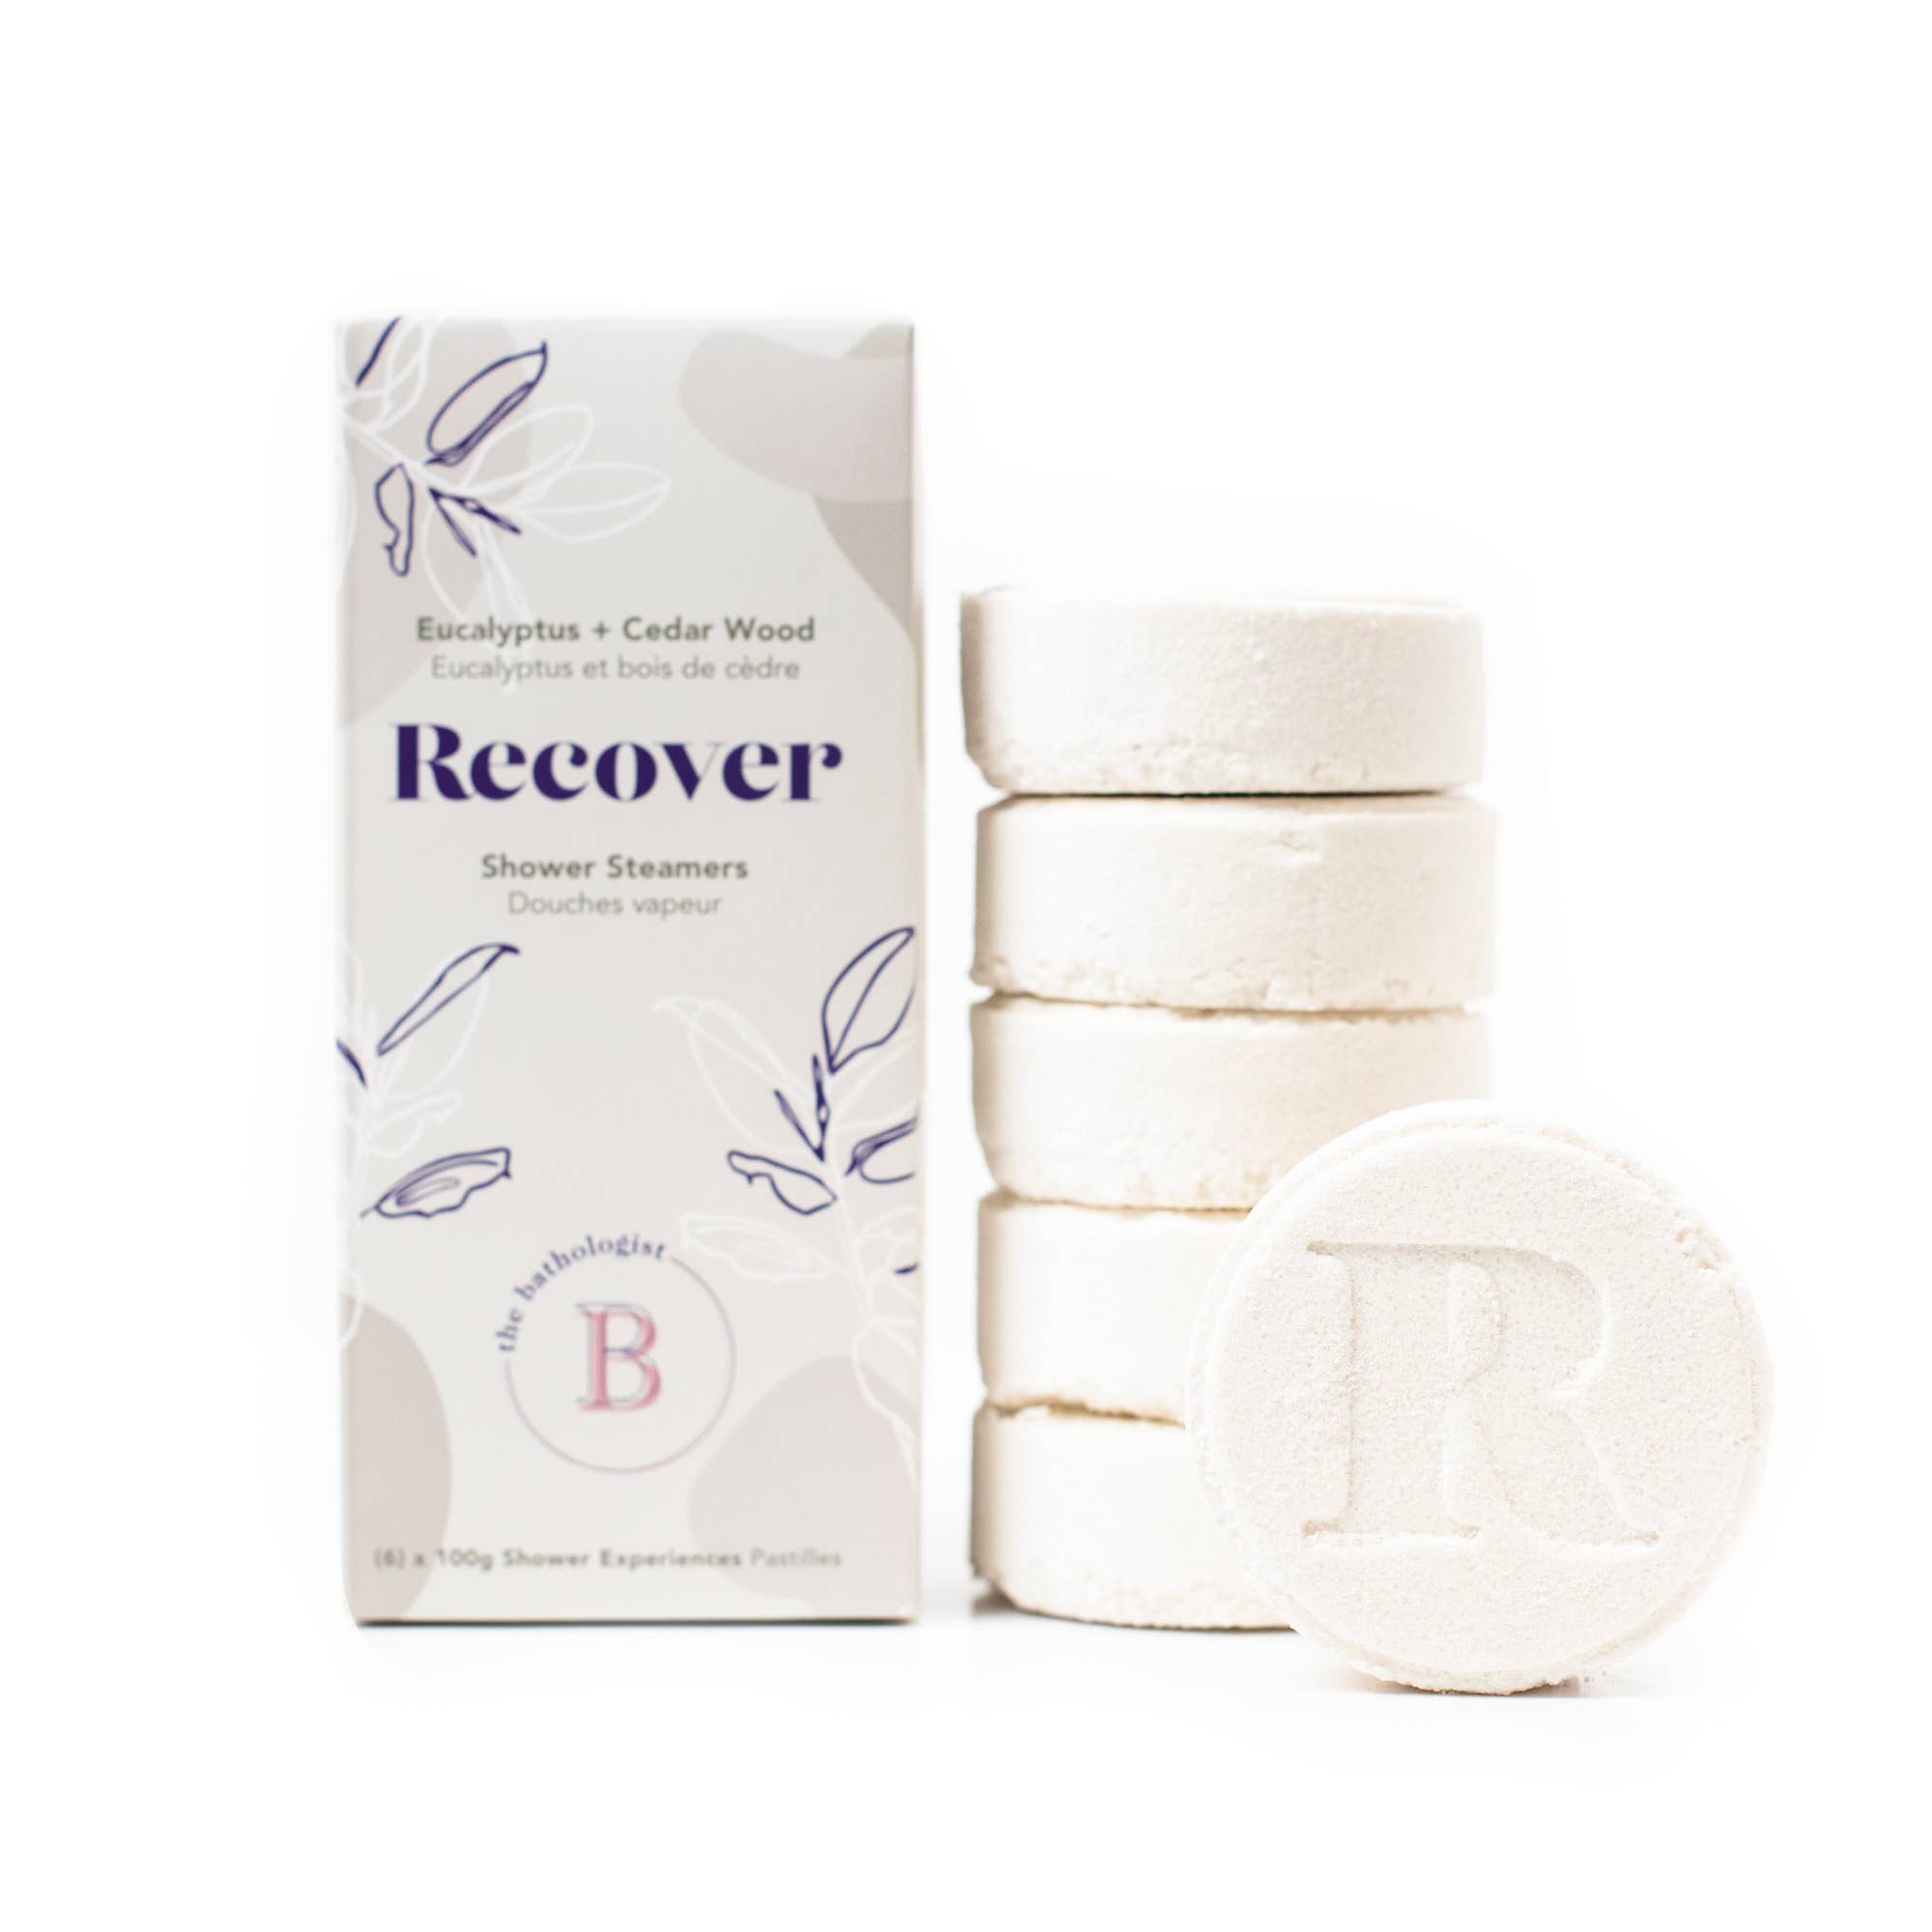 The Bathologist | Recover Shower Steamers